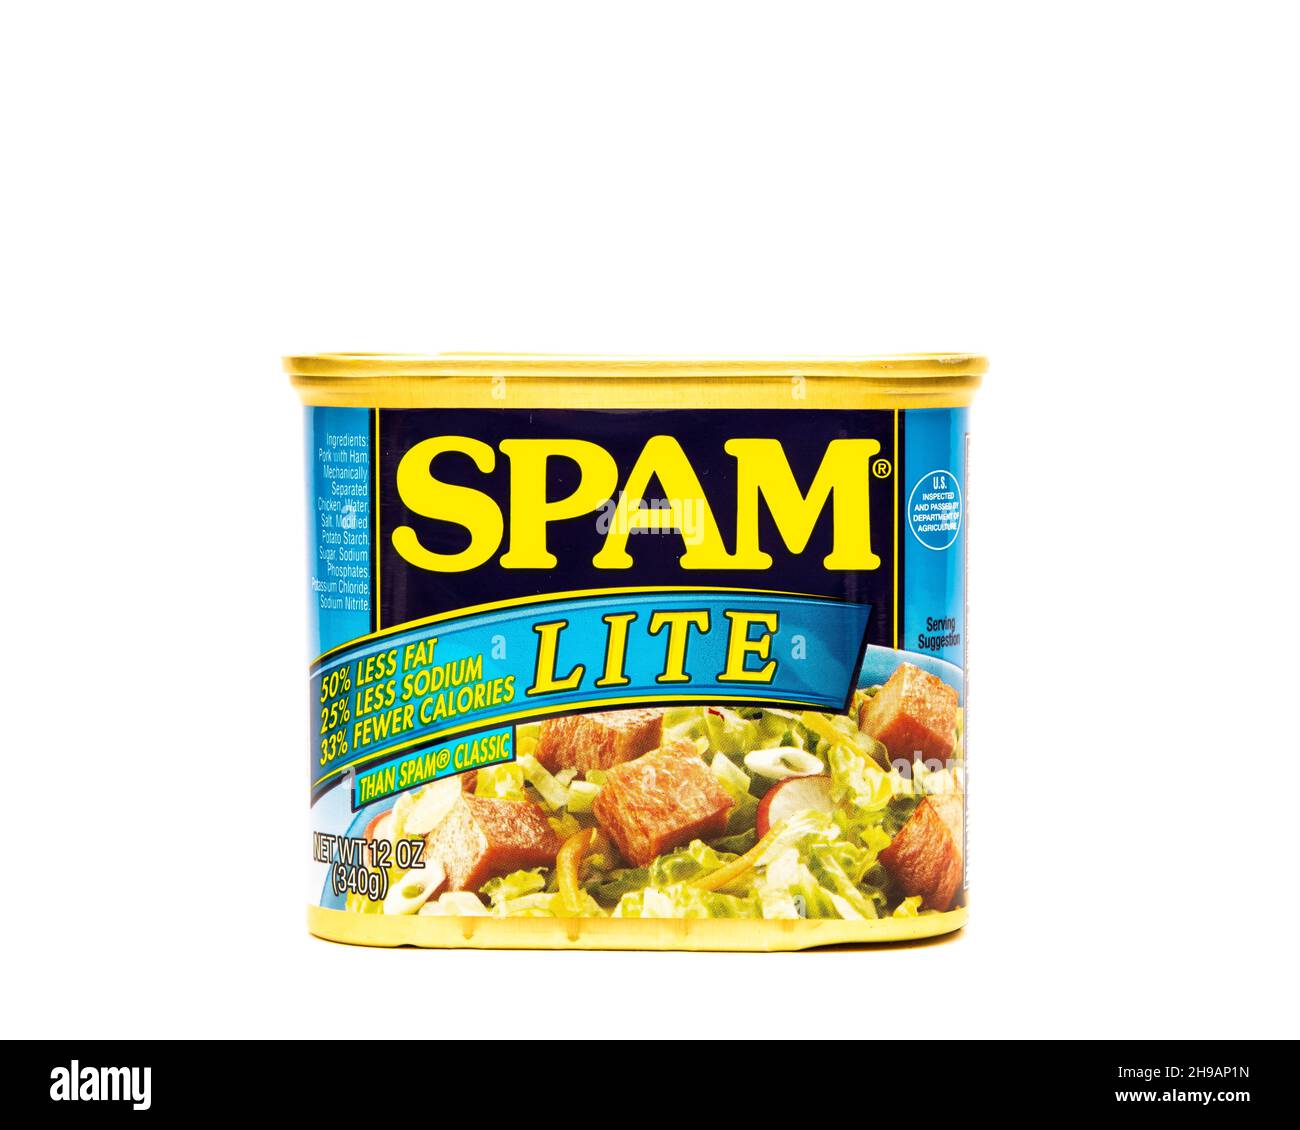 An image of a can of Hormel Spam Lite, fully cooked pork with less fat, sodium and calories isolated on white Stock Photo